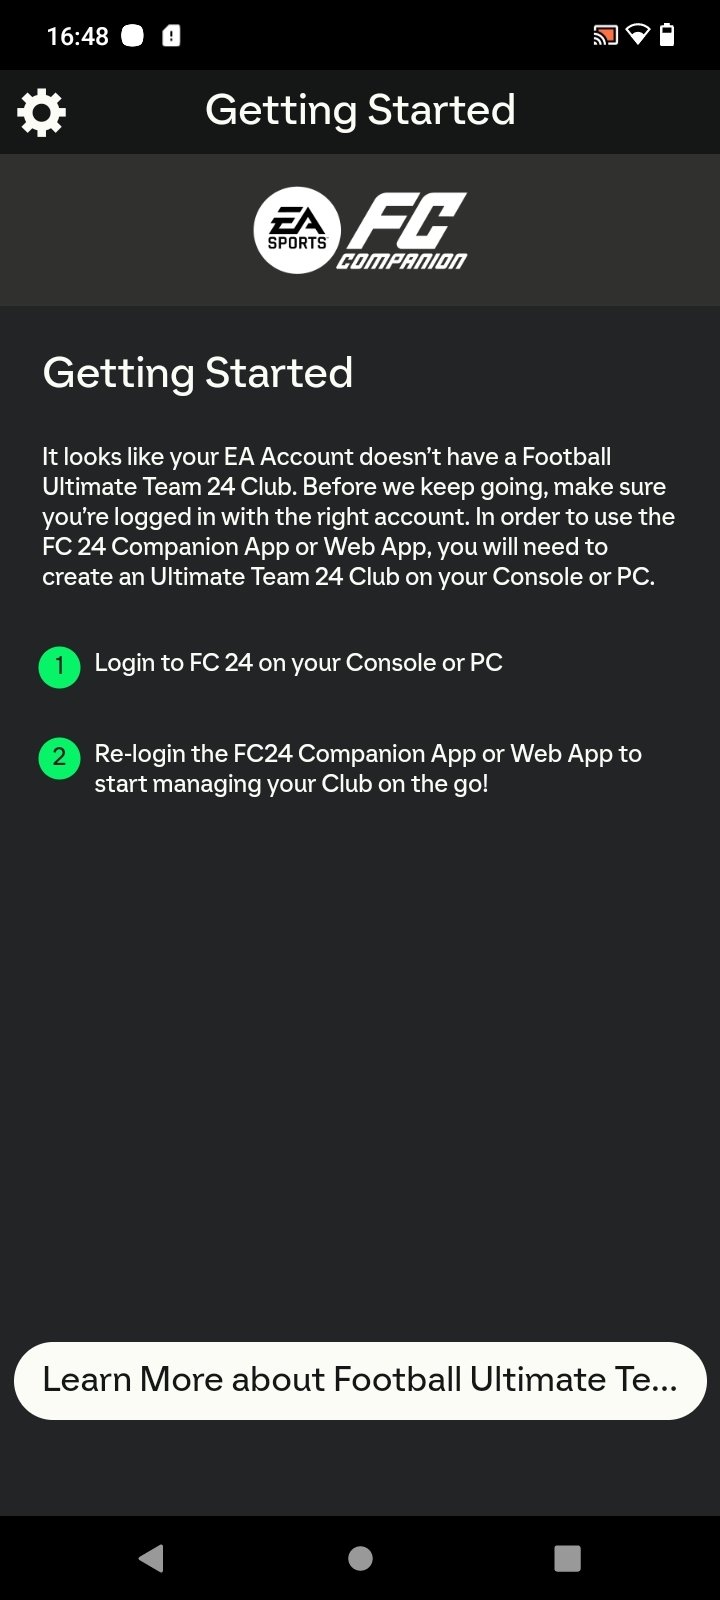 Do you need to own EA FC 24 to access the web app?